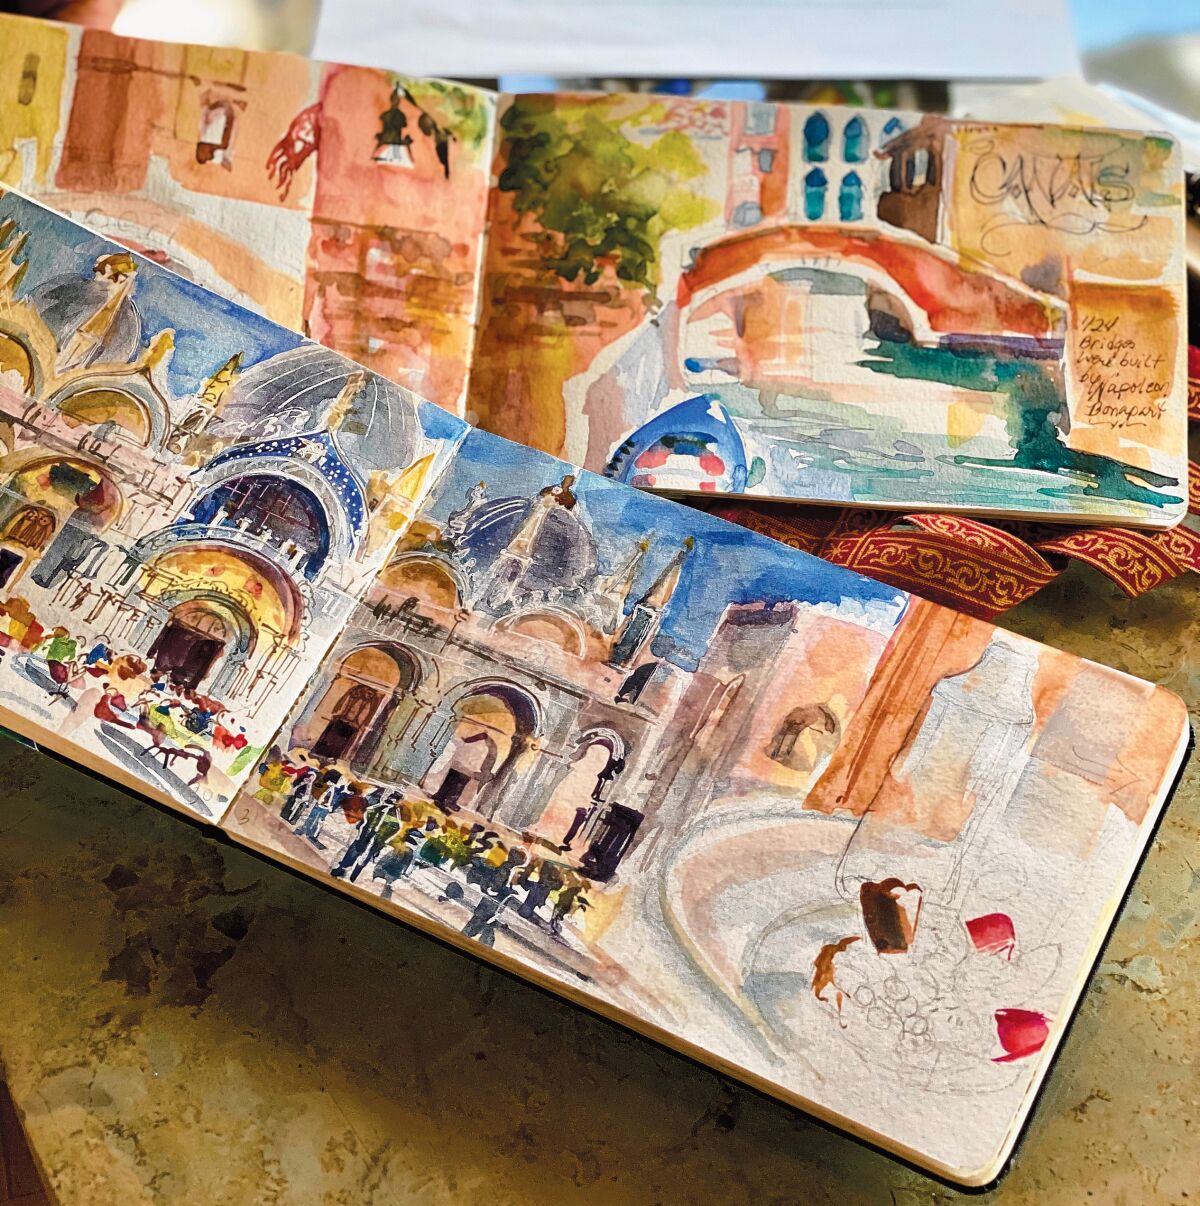 Cherry Sweig’s travel journals are full of her watercolors, which serve as the preliminary versions of the canvassed paintings she created for the show. Cherry Sweig's art exhbit, 'Finding Venetian Angels,' is on display Feb. 28-April 12, 2020 at St. James by-the-Sea Episcopal Church’s Gallery by-the-Sea, 743 Prospect St., La Jolla. The exhibit can be viewed 12:30-3 p.m. Wednesdays, 11 a.m. to 2 p.m. Saturdays, and 8:30-10 a.m. and 11 a.m. to 2 p.m.